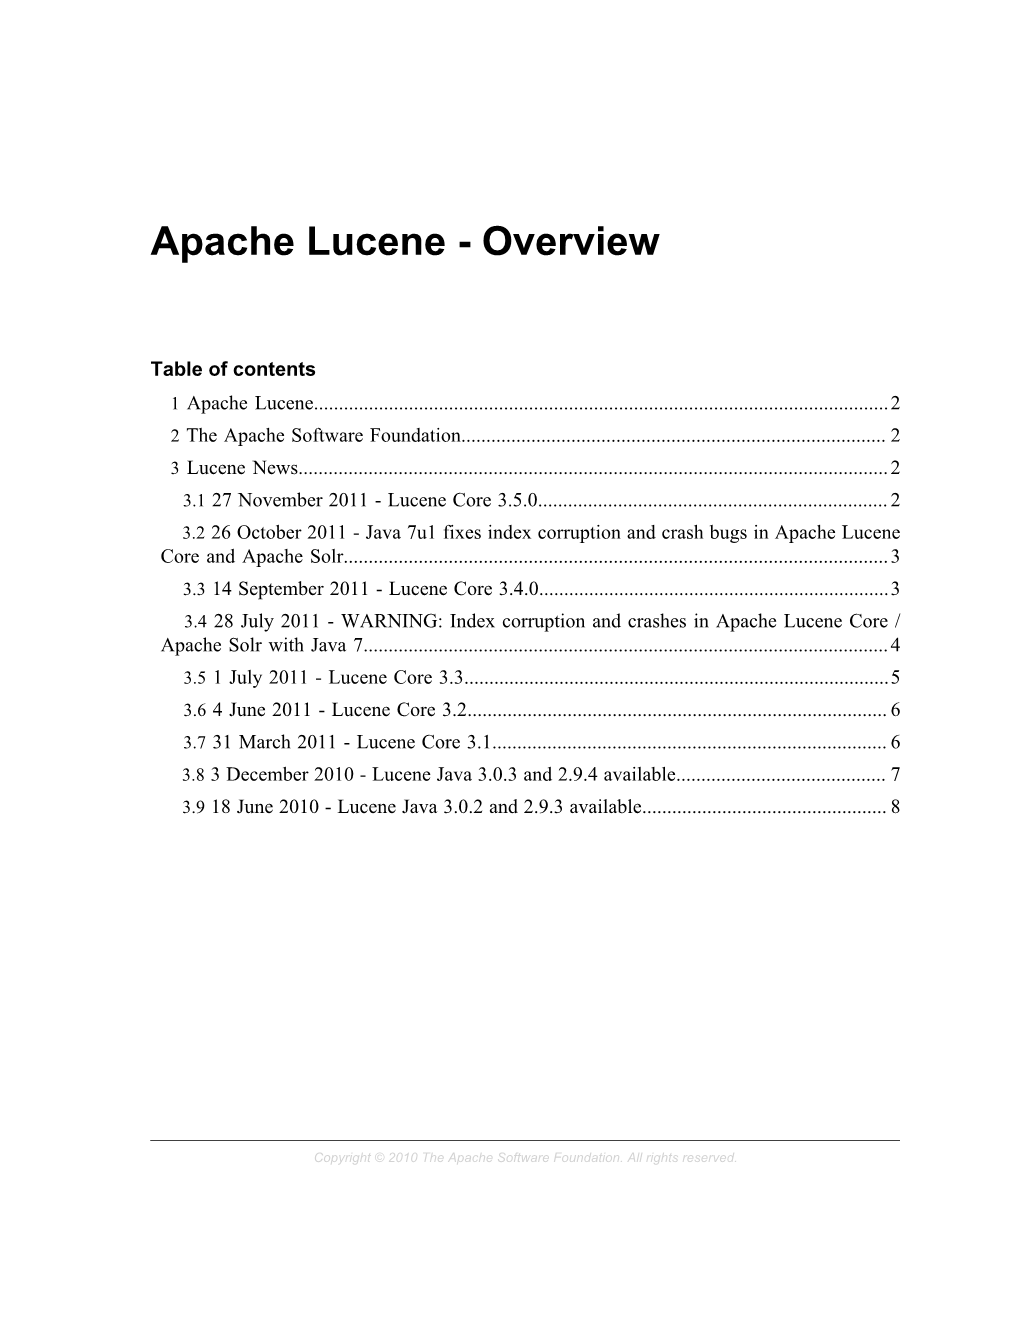 Apache Lucene - Overview